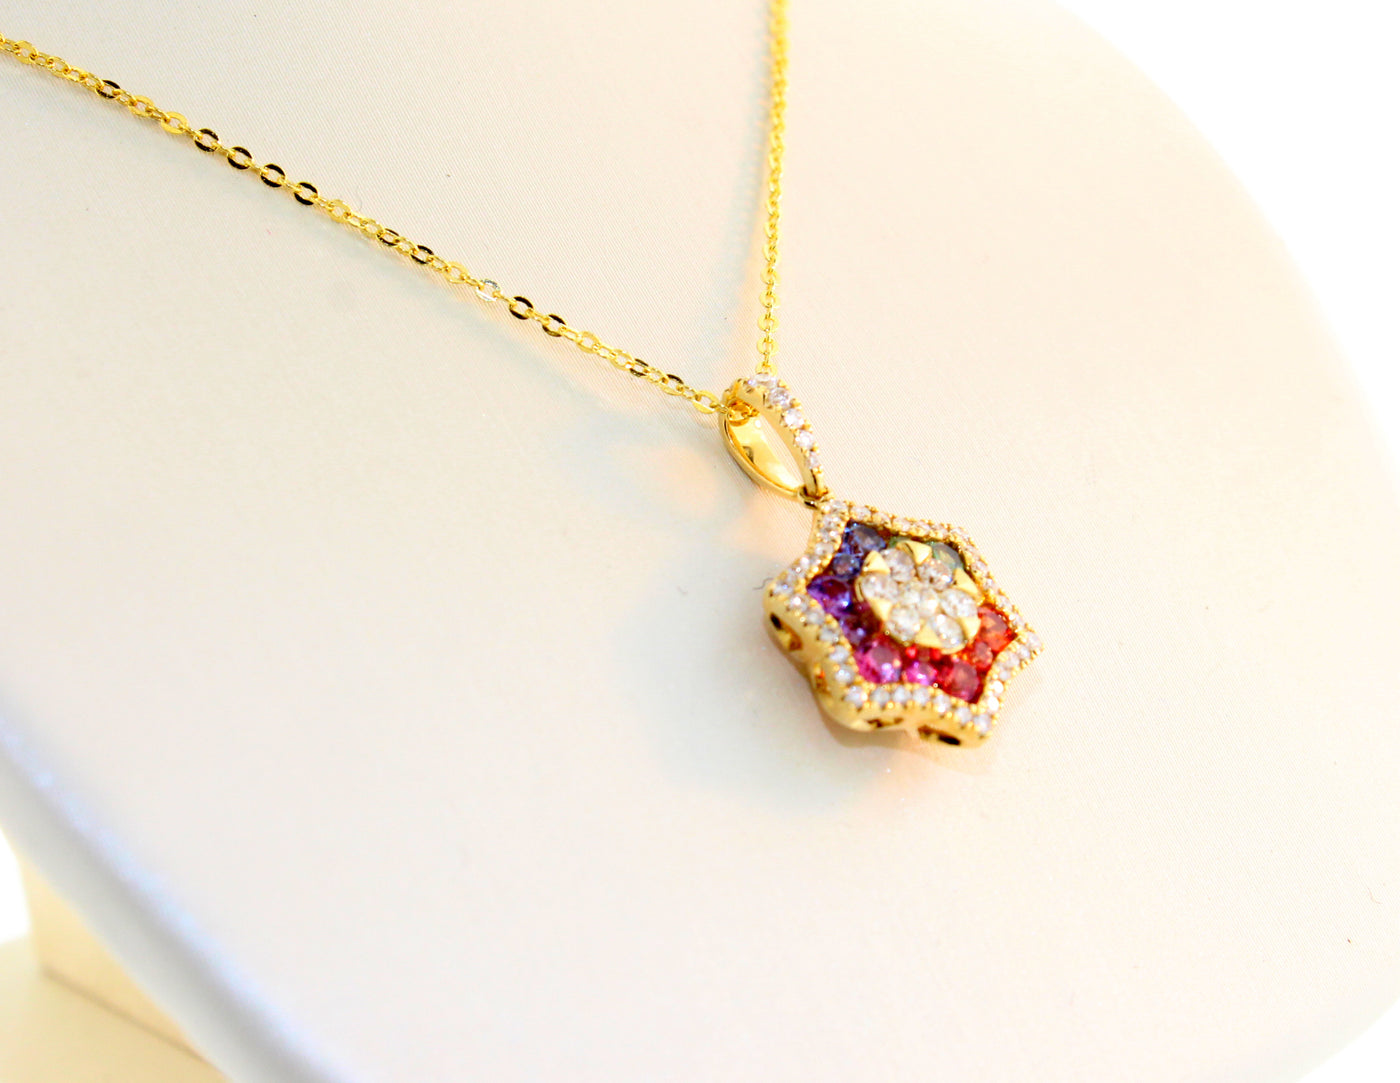 18KY Multi color Sapphire and Diamond Necklace